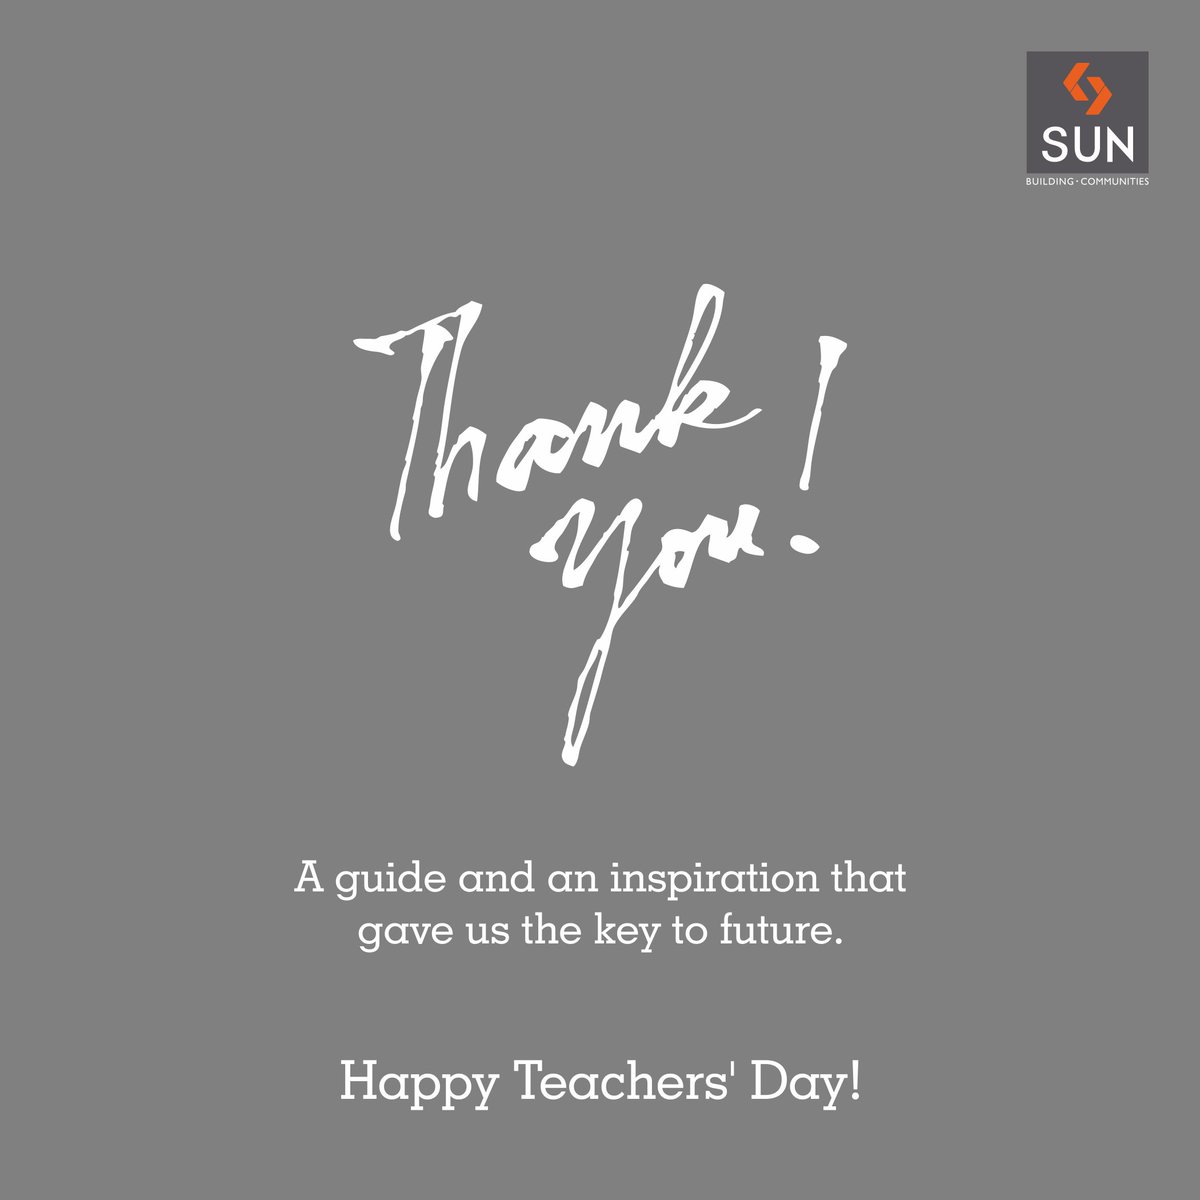 Thank you teacher for imparting your knowledge-wealth and igniting our future.
#TeachersDay #Knowledge #Future https://t.co/Ci3uAfoqXd